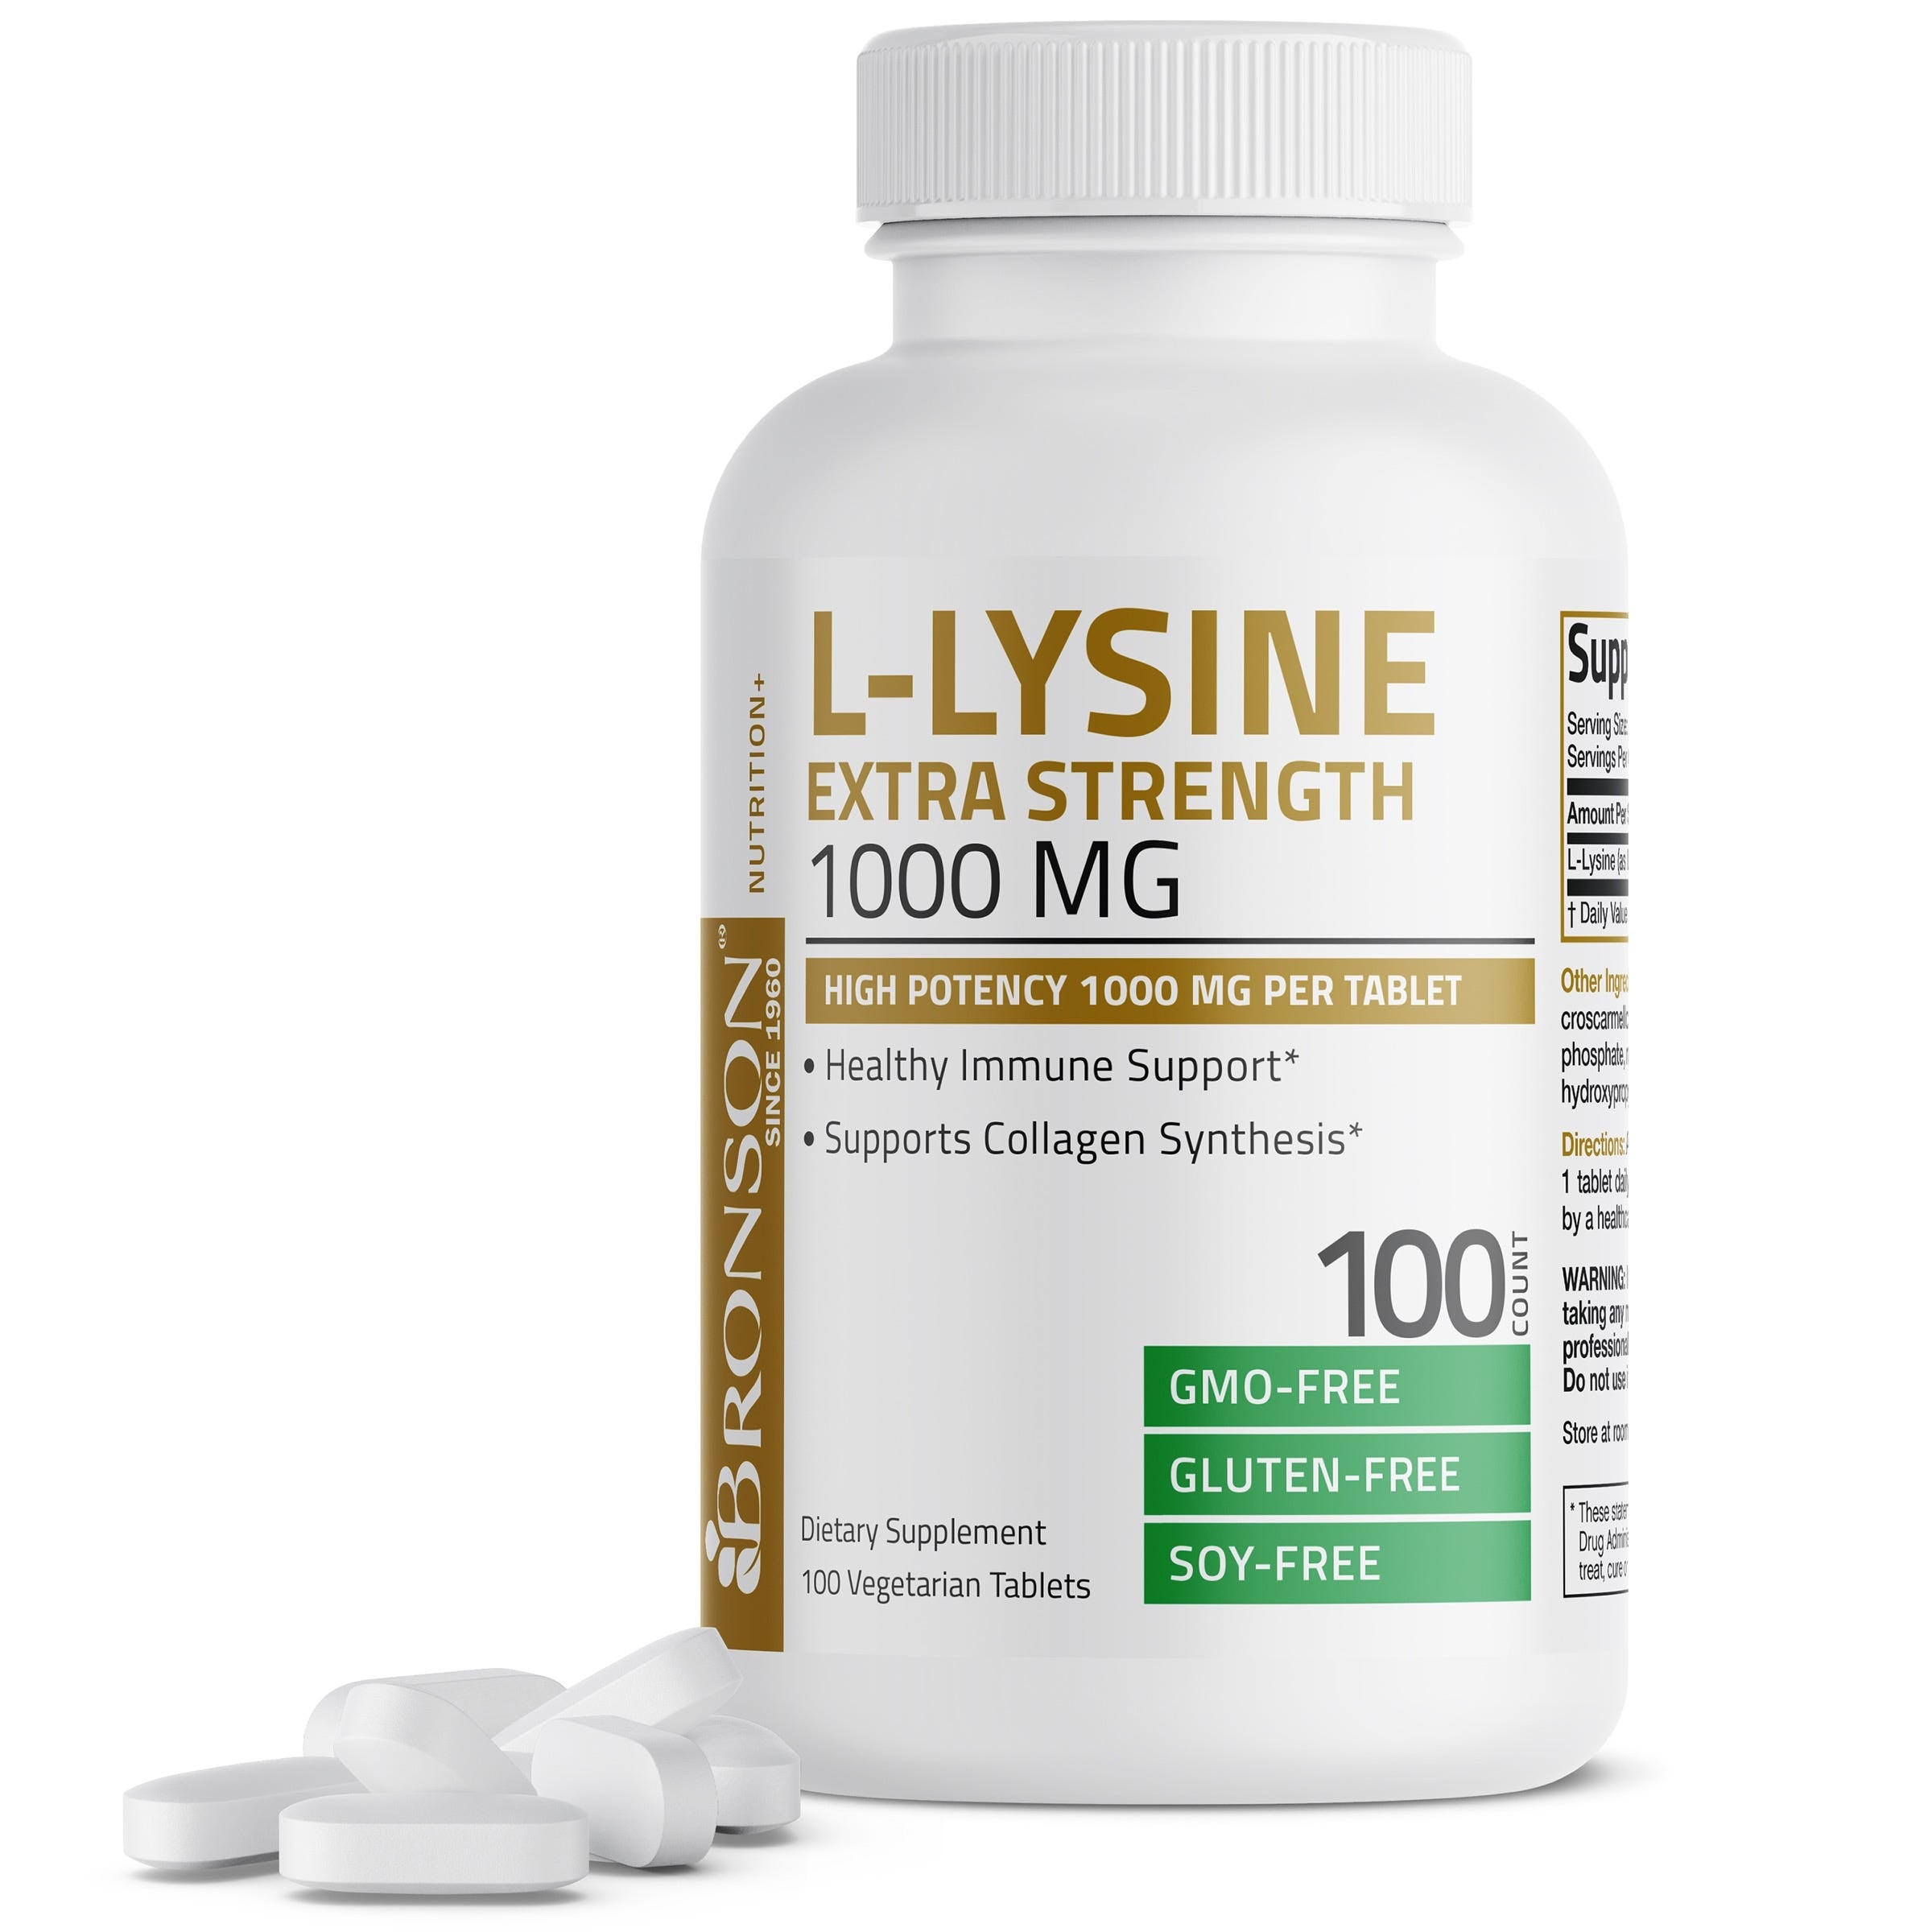 L-Lysine Extra Strength 1,000 MG view 1 of 6